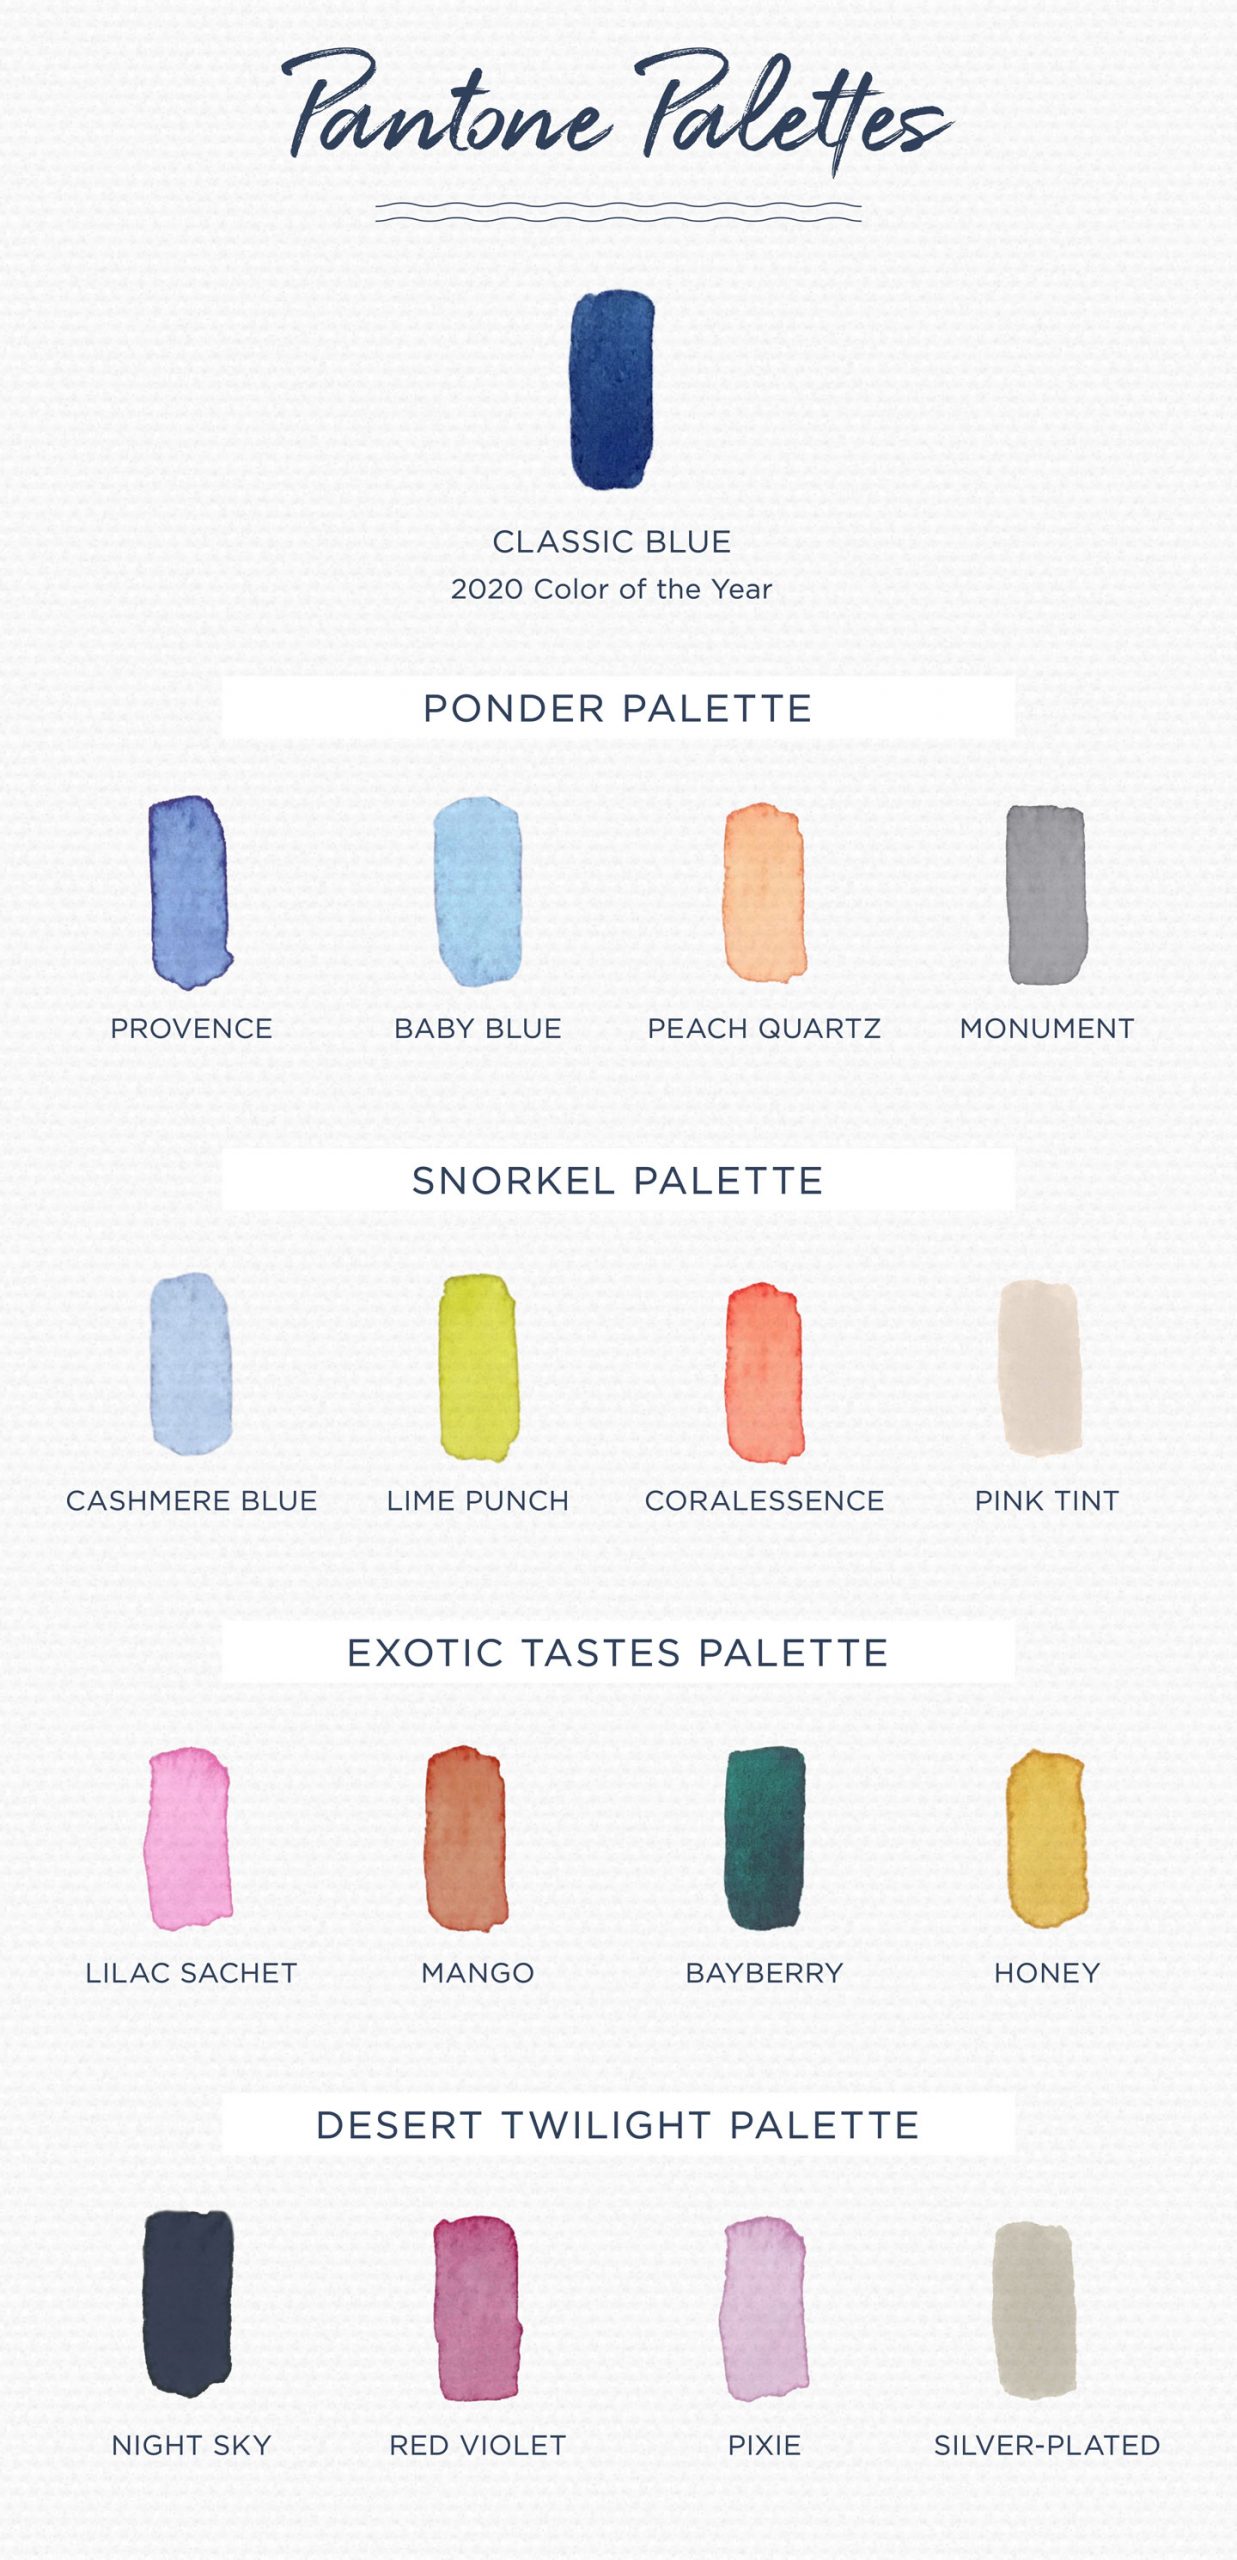 PALETTE definition and meaning